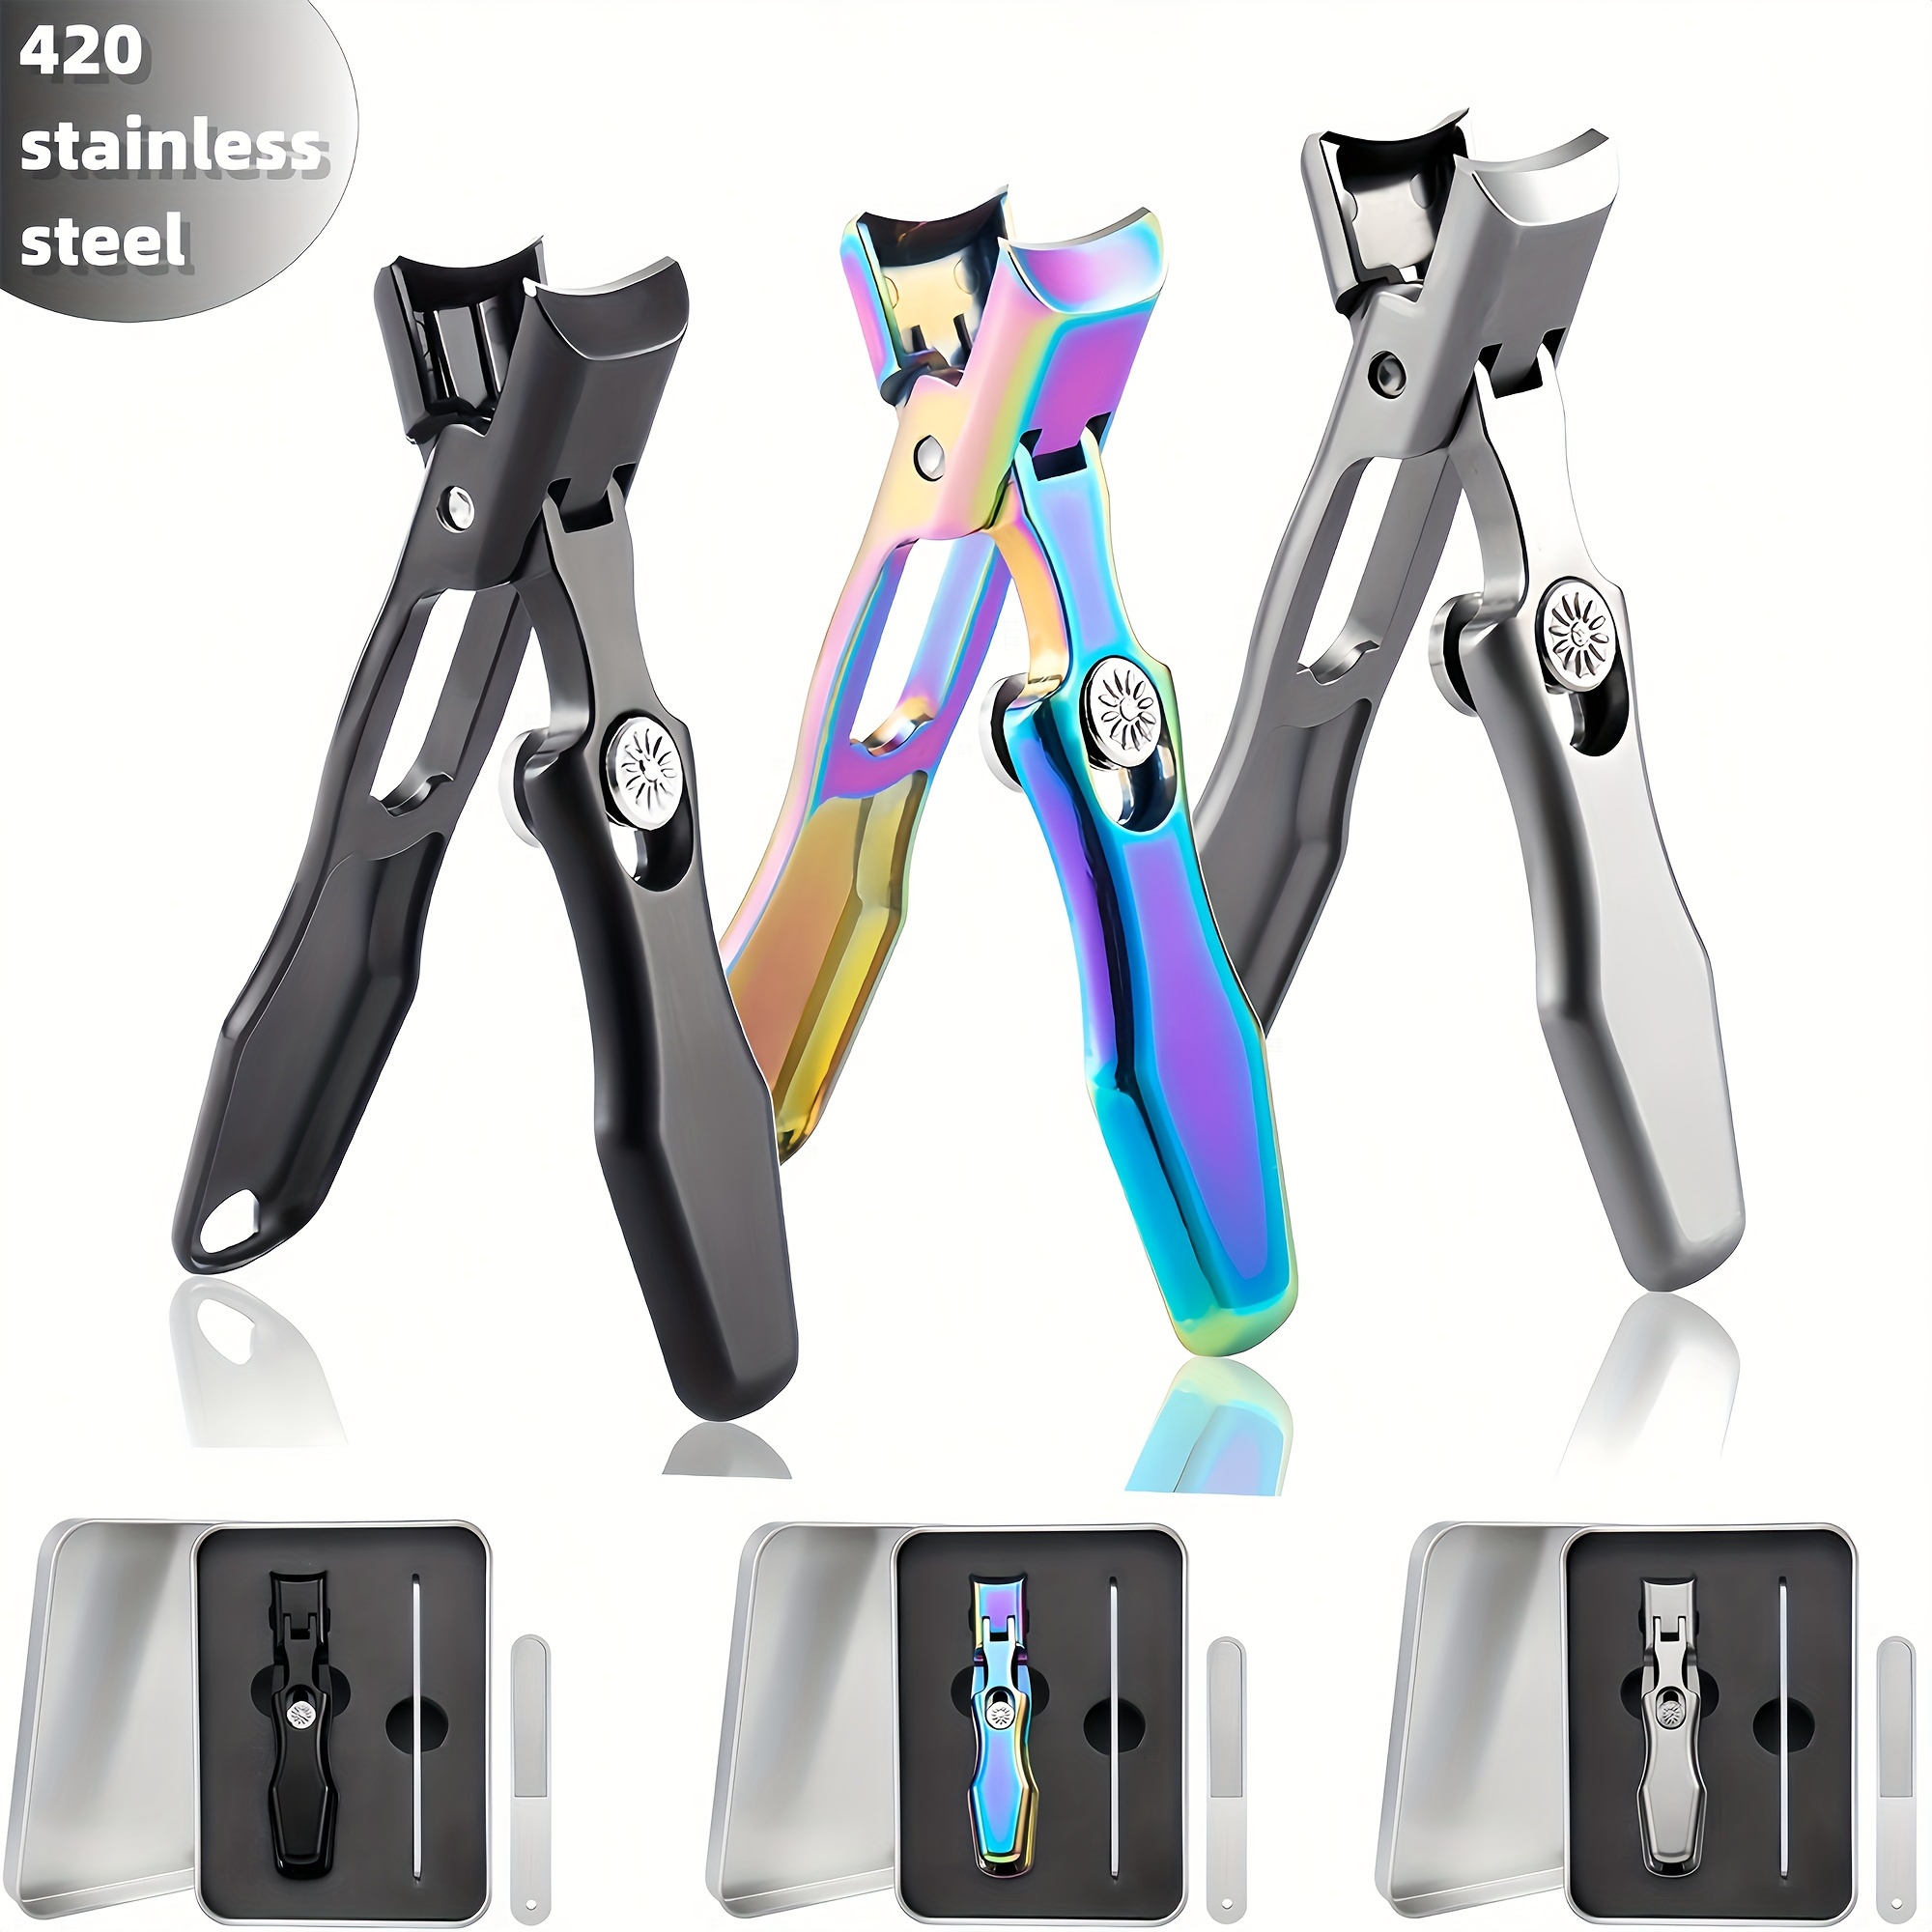 

Ultra Sharp 420 Stainless Steel Nail Clippers With Wide Jaw Opening Set